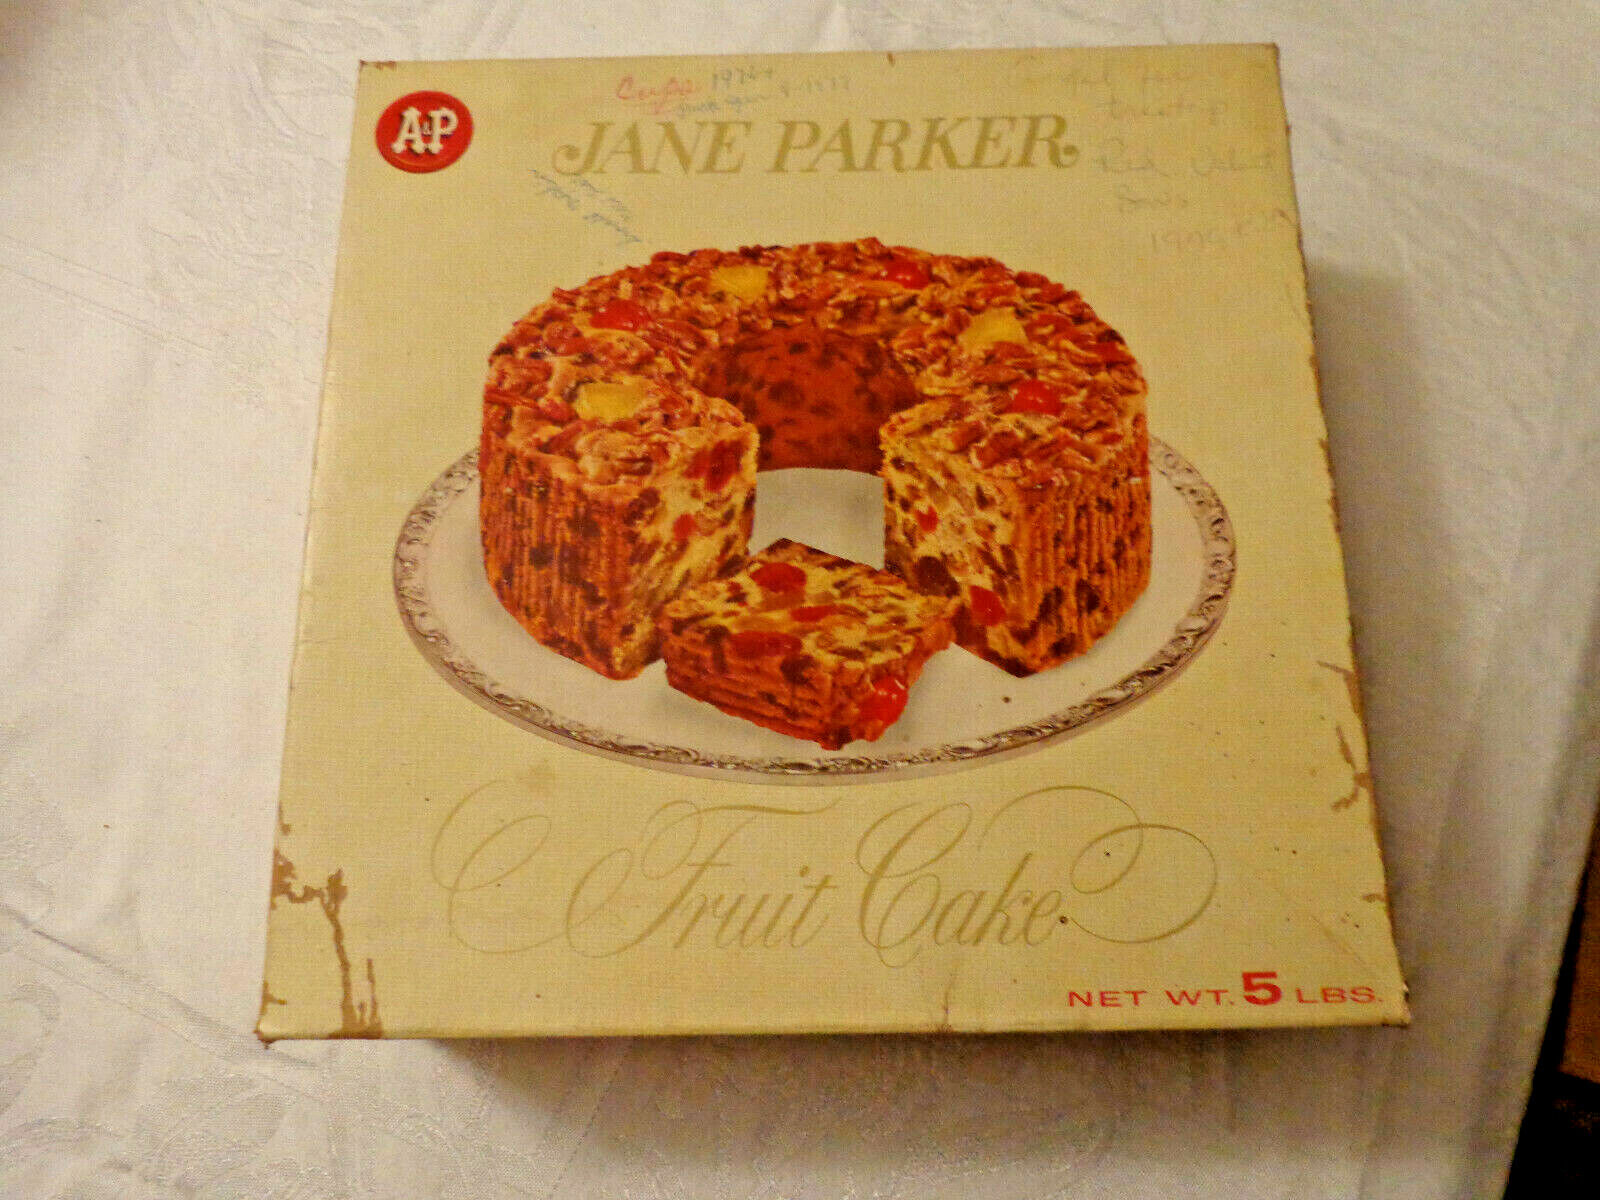 Vintage A&P Jane Parker Fruit Cake BOX Fully intact (No Cake) Ad Collectors